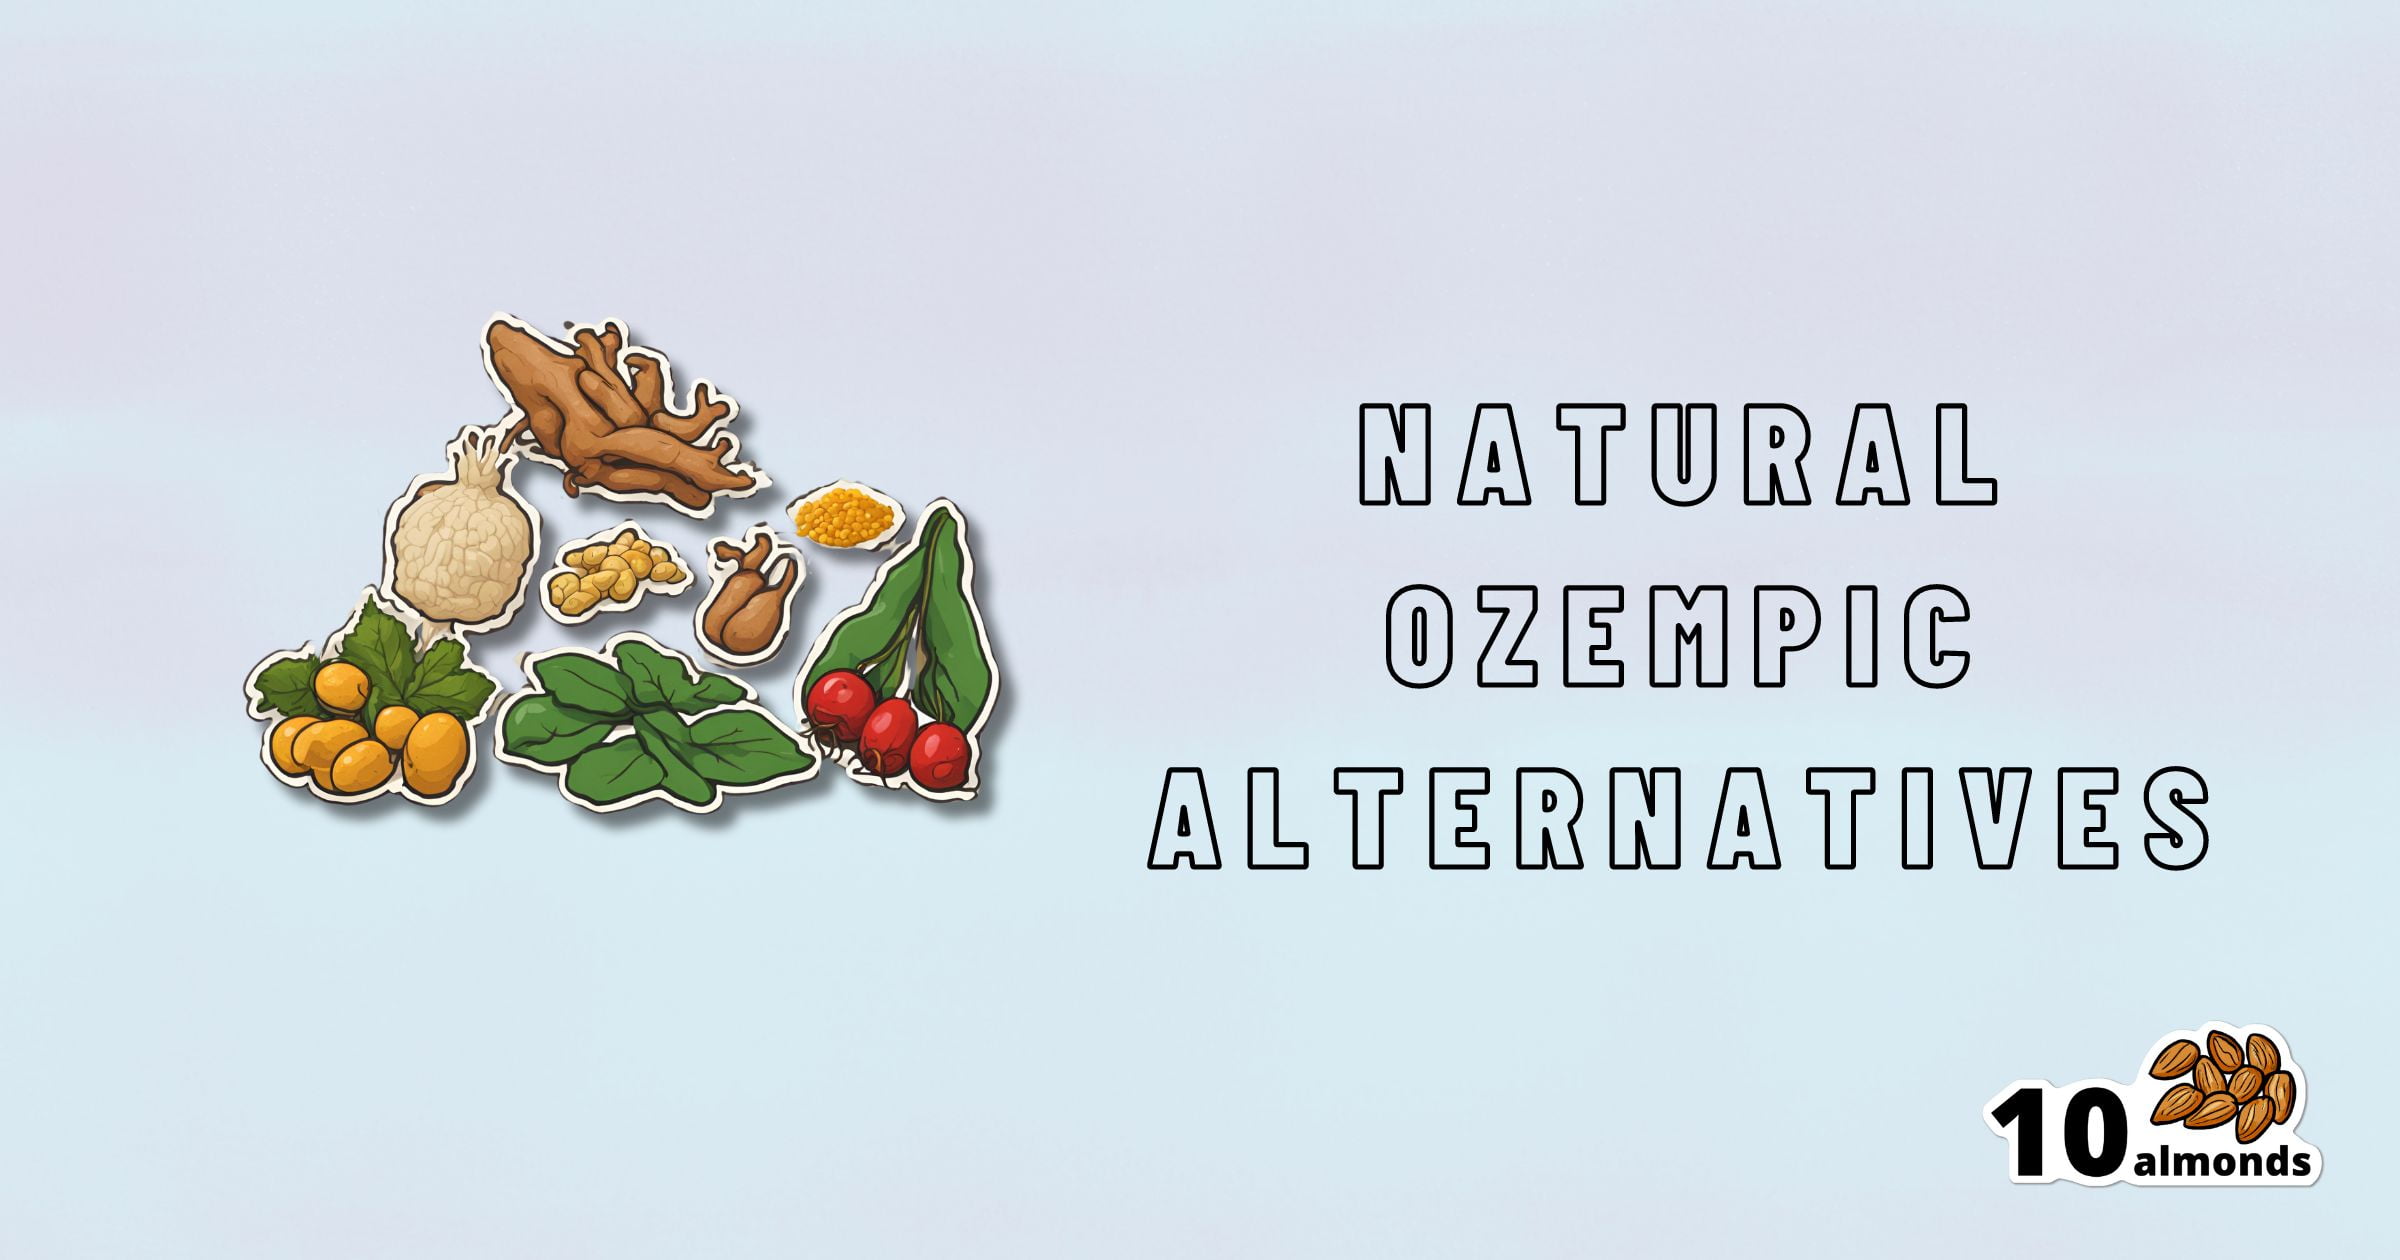 An illustration shows various natural ingredients, such as ginger and berries, with the text "Natural Ozempic Alternatives" to the right. The number "10" and an image of almonds are displayed at the bottom right, highlighting natural supplements.